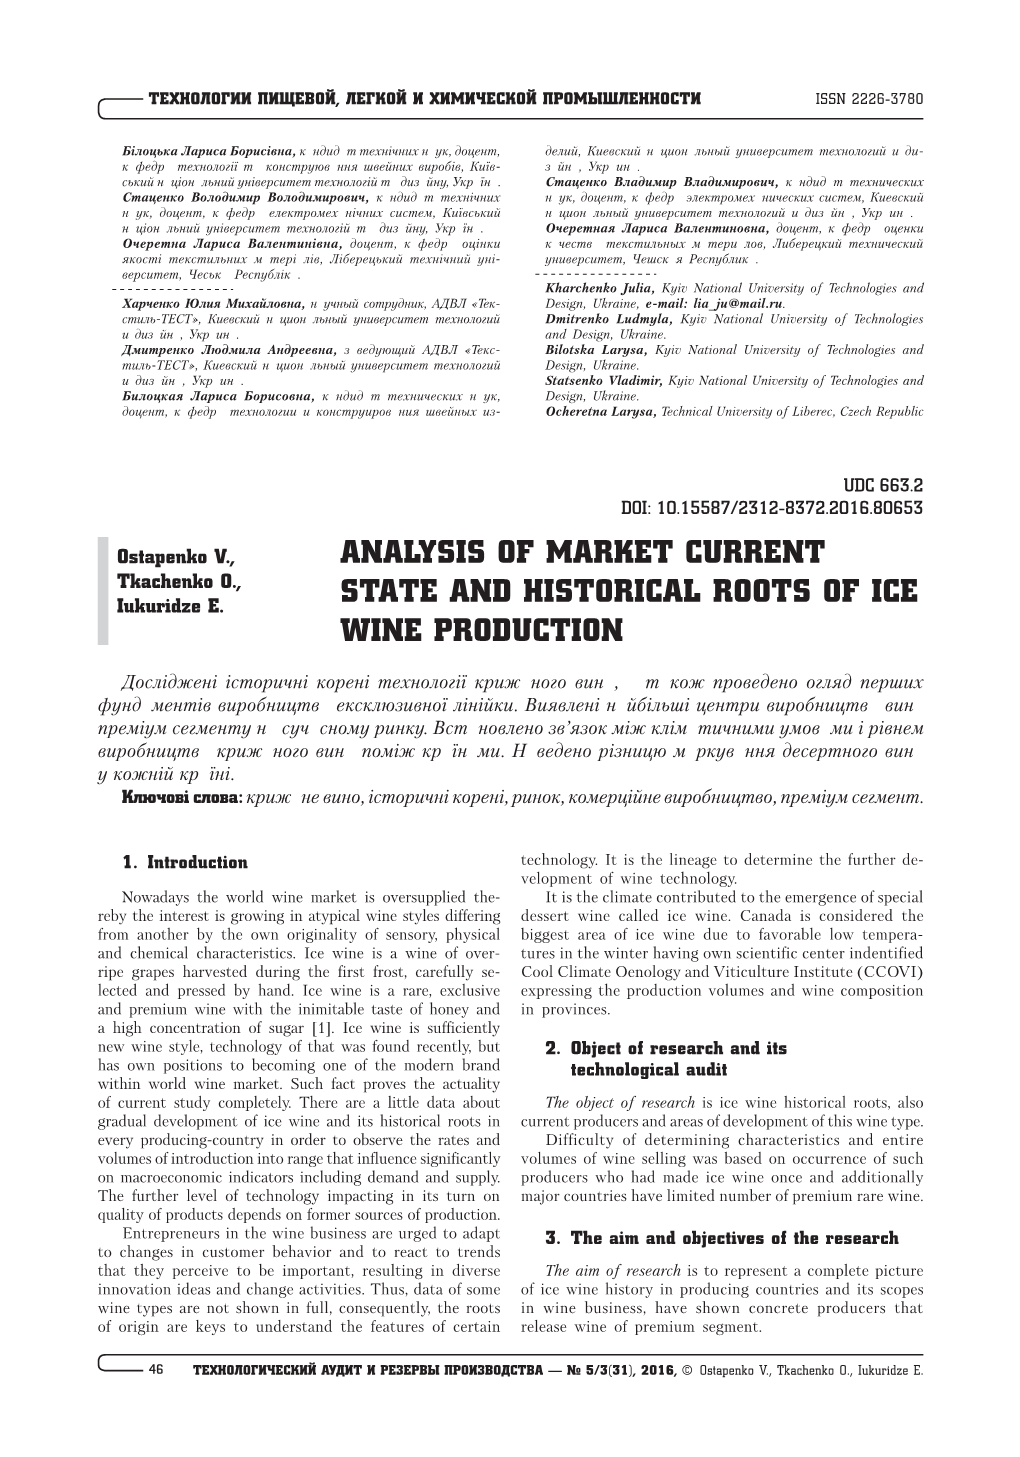 Analysis of Market Current State and Historical Roots